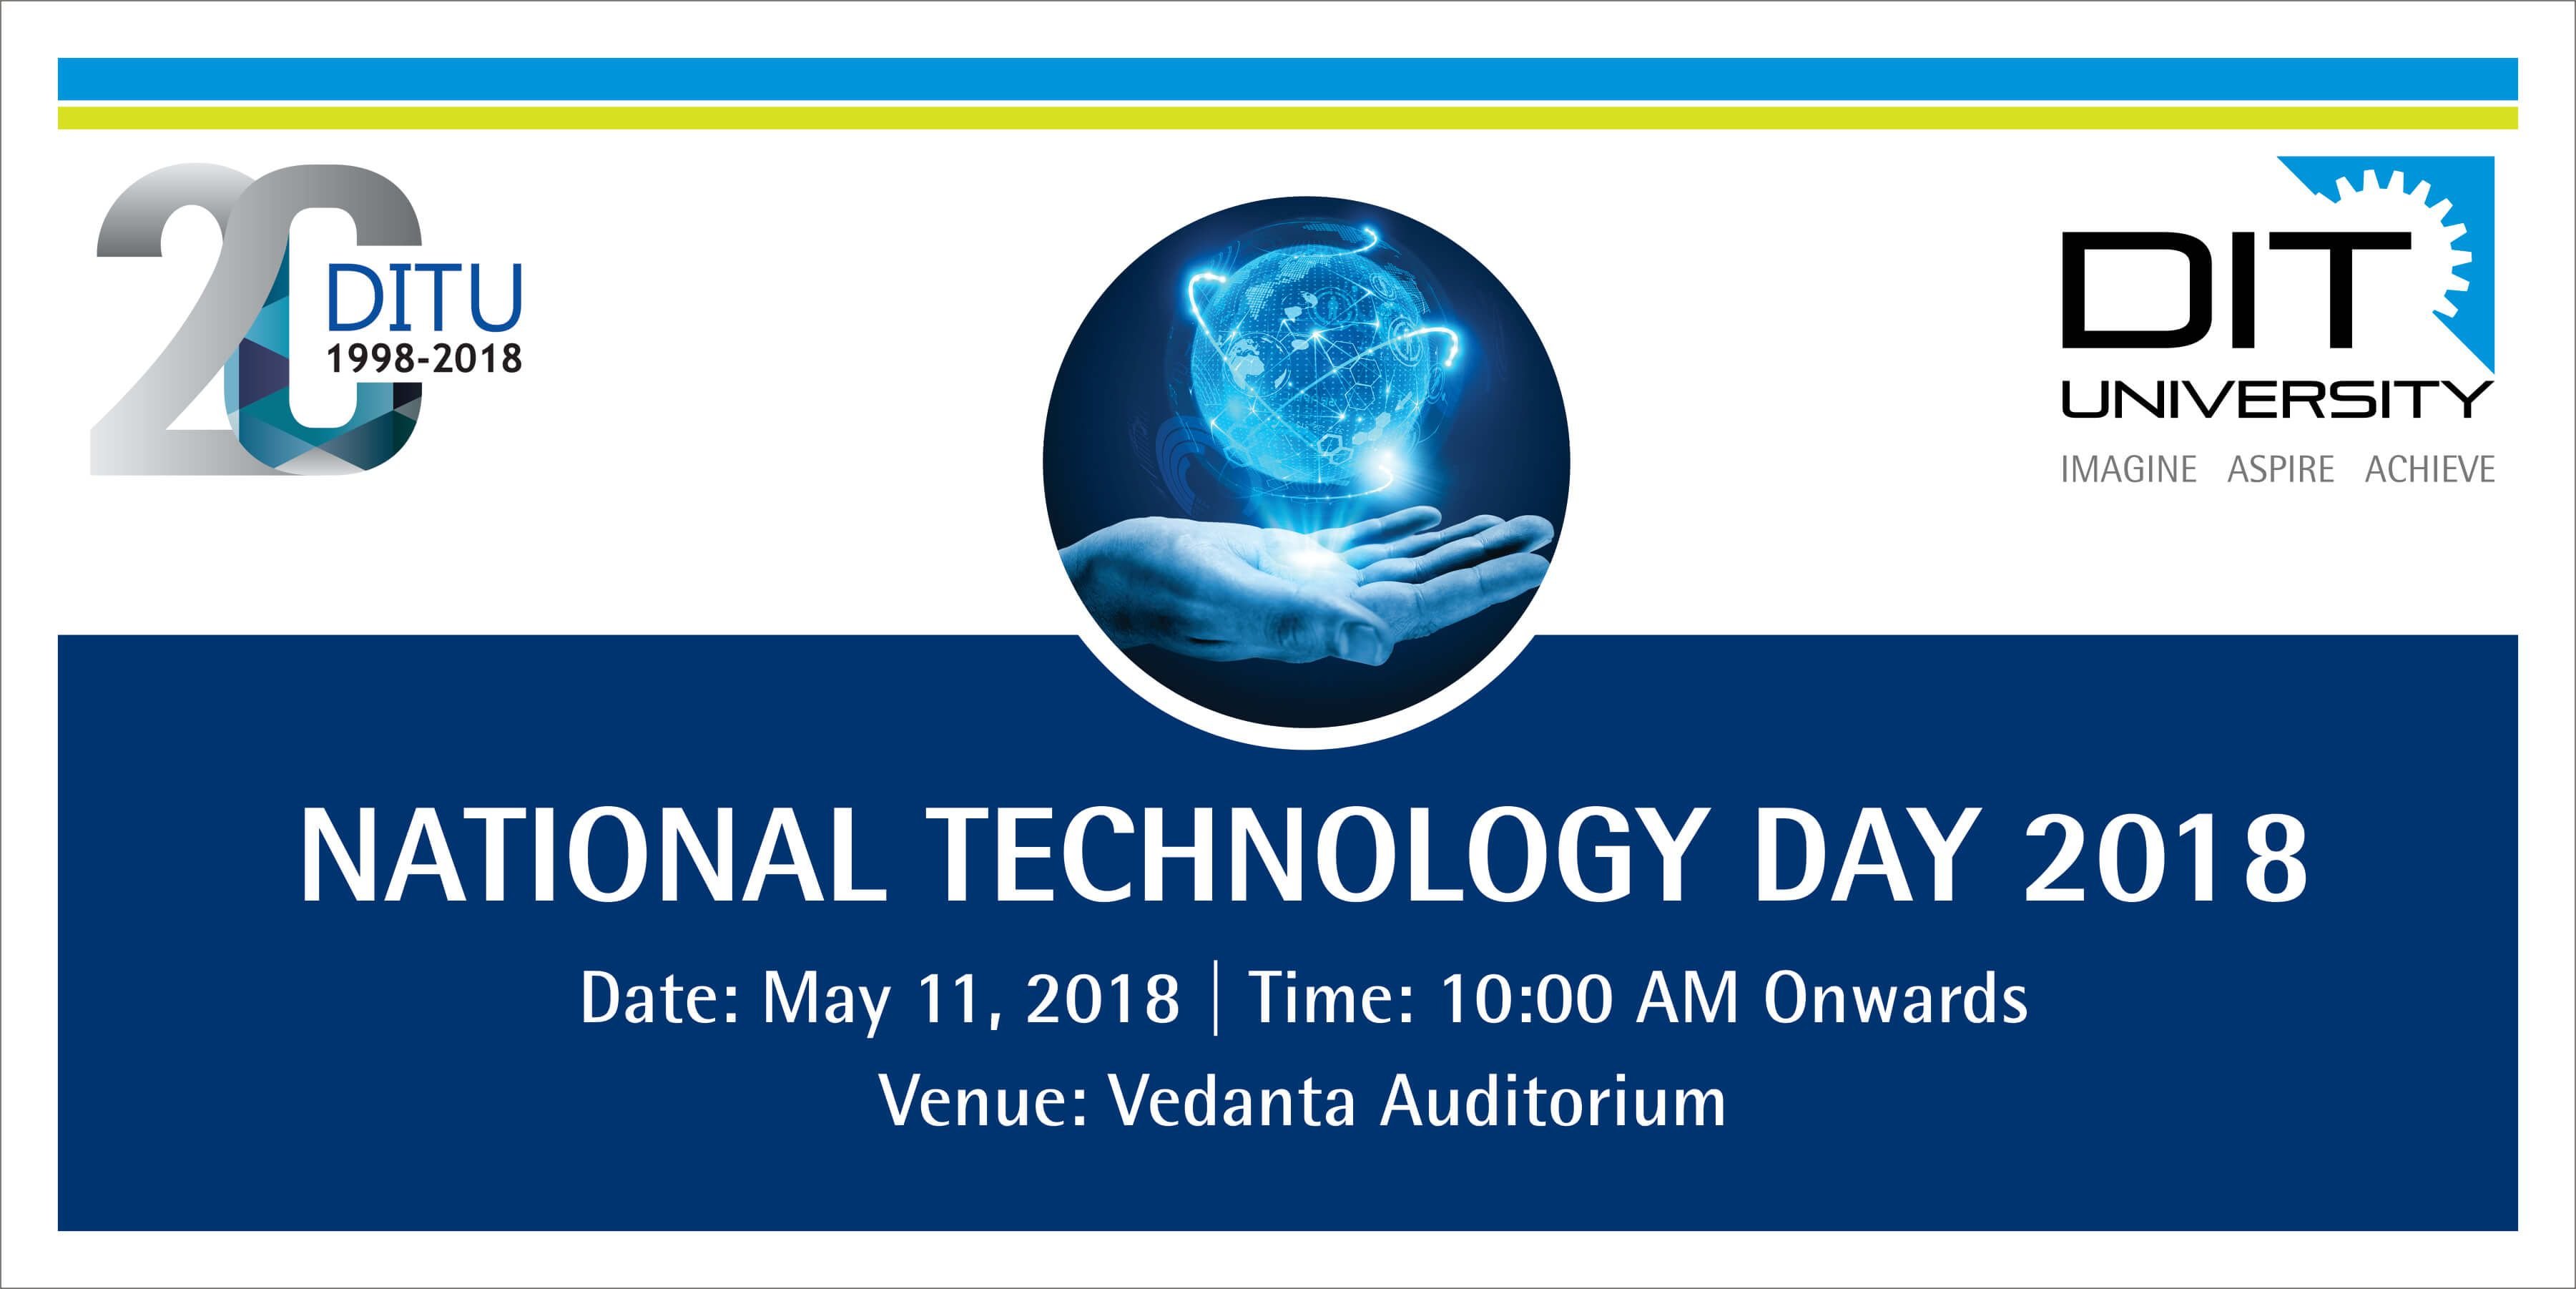 National Technology Day 2018